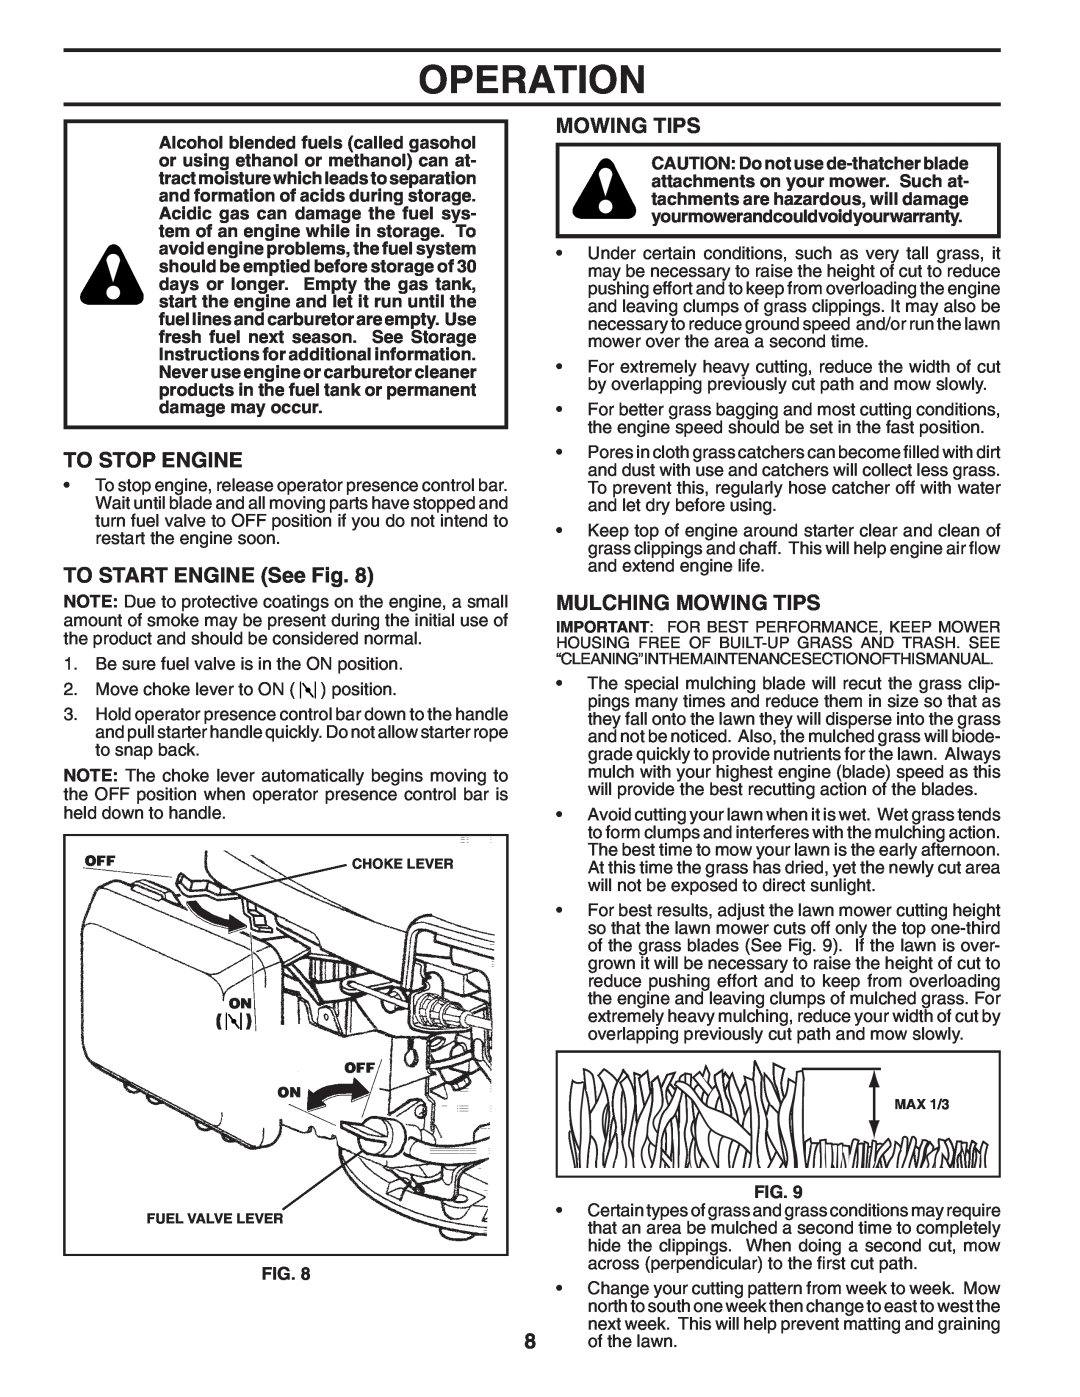 Husqvarna 7021P owner manual To Stop Engine, TO START ENGINE See Fig, Mulching Mowing Tips, Operation 